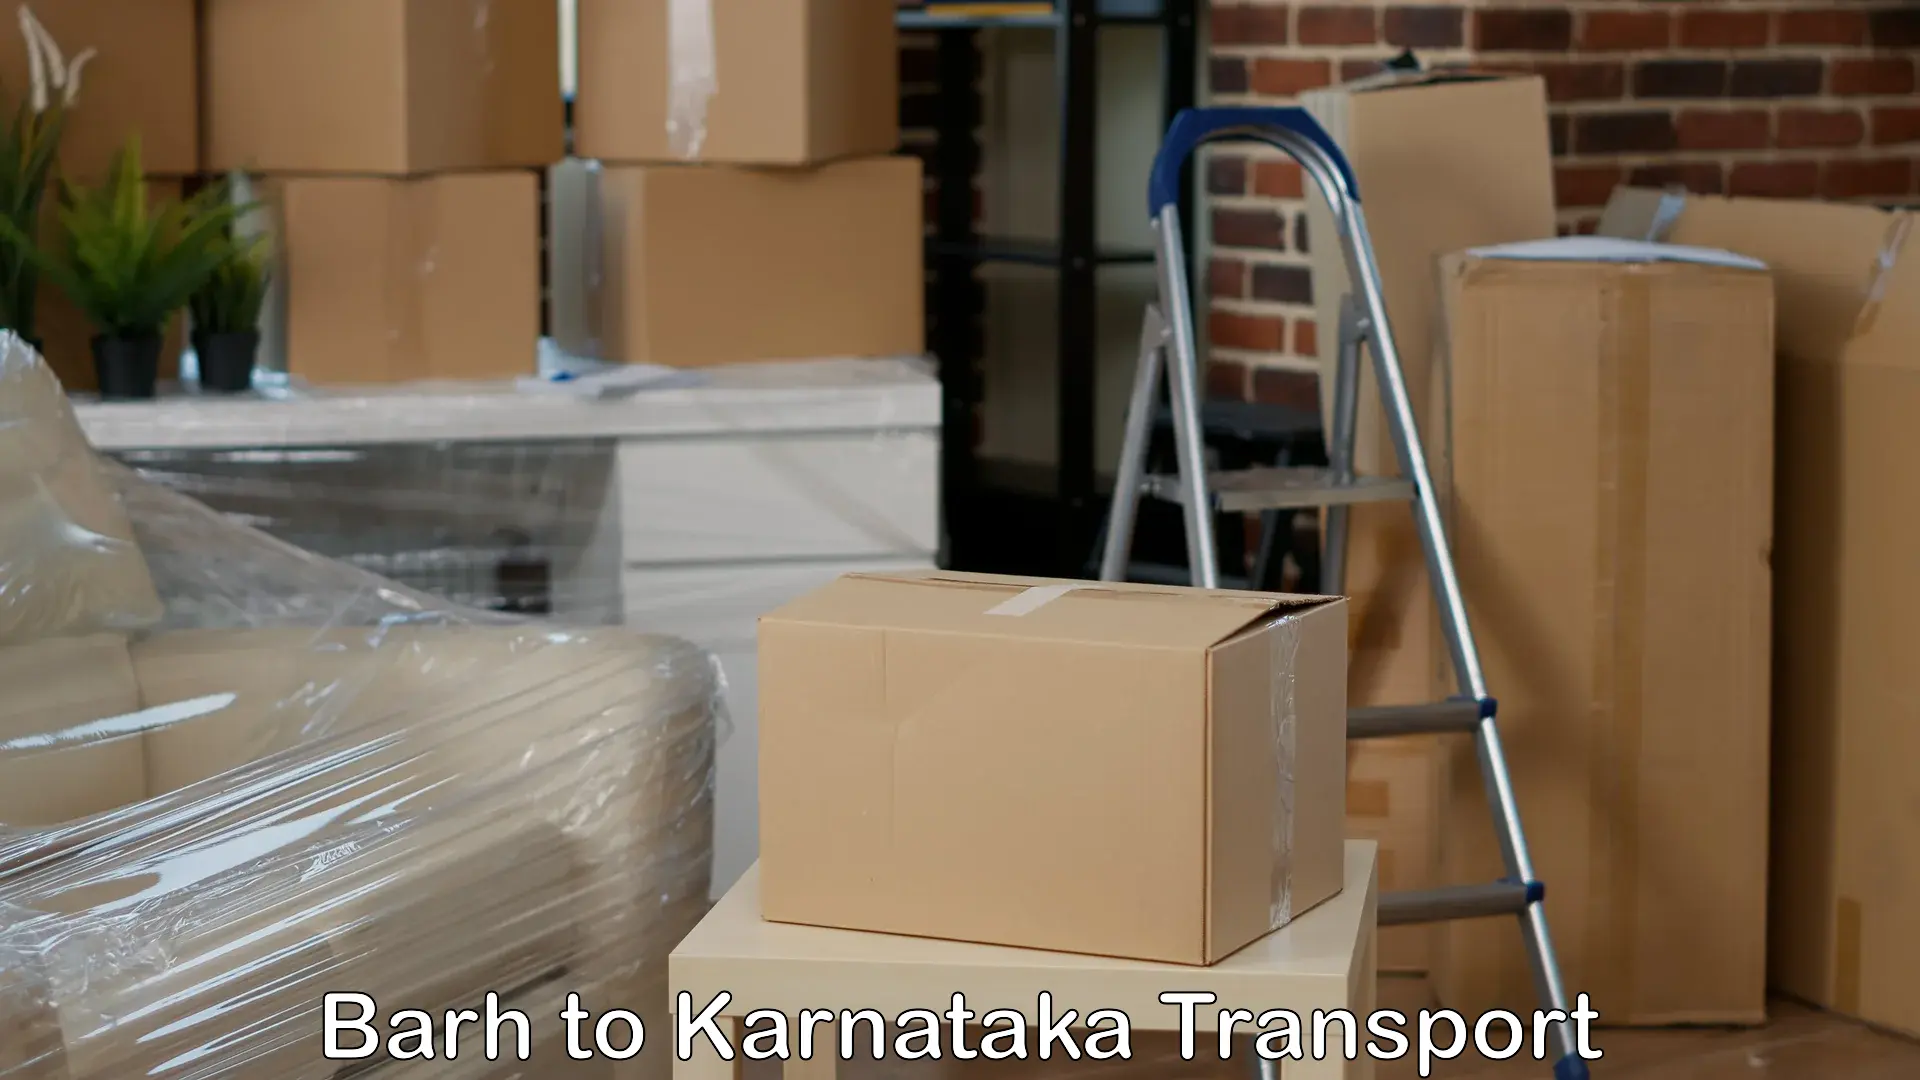 Air freight transport services Barh to Mysore University